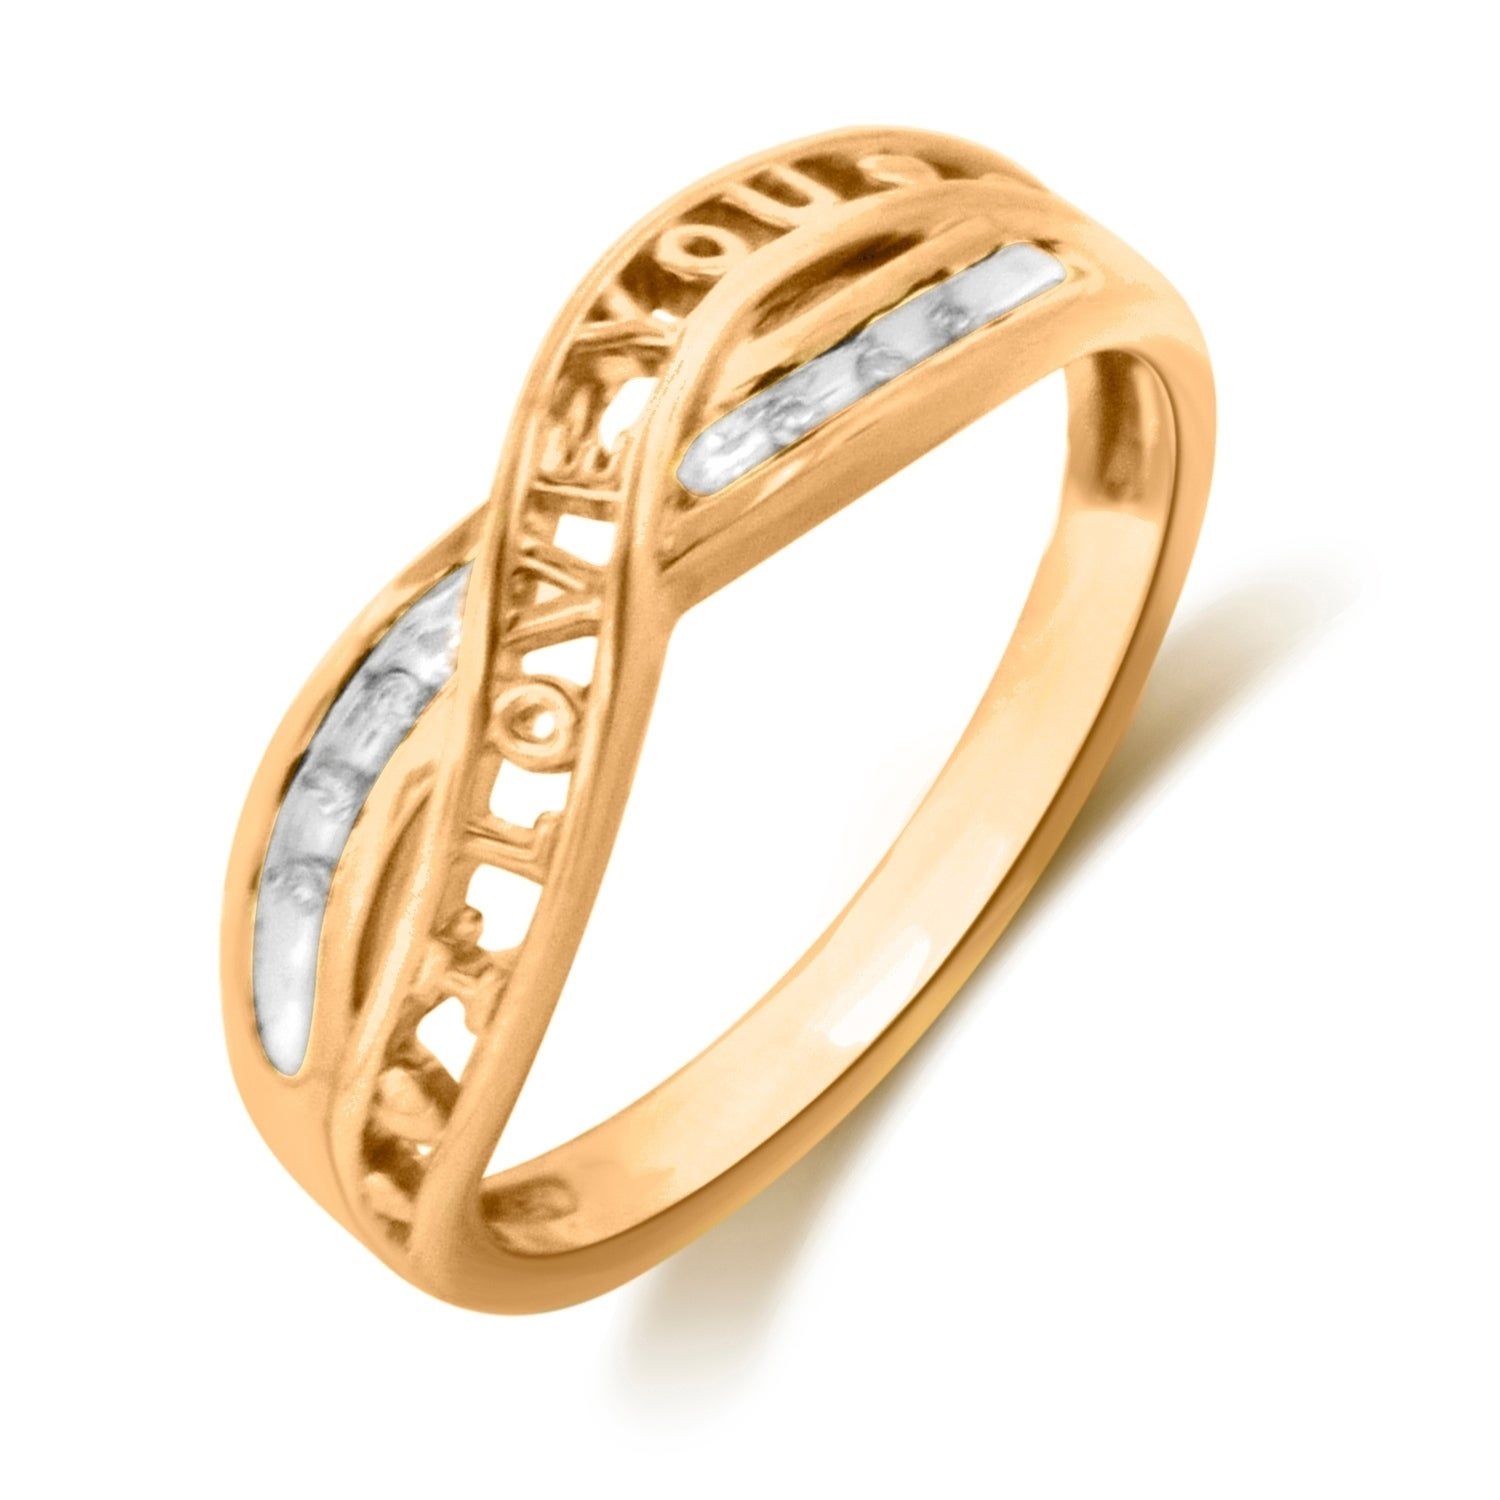 Sterling Silver With Yellow Gold Plate Diamond Accent Anniversary Ring Pertaining To Most Up To Date Diamond Accent Anniversary Bands In Sterling Silver (View 15 of 25)